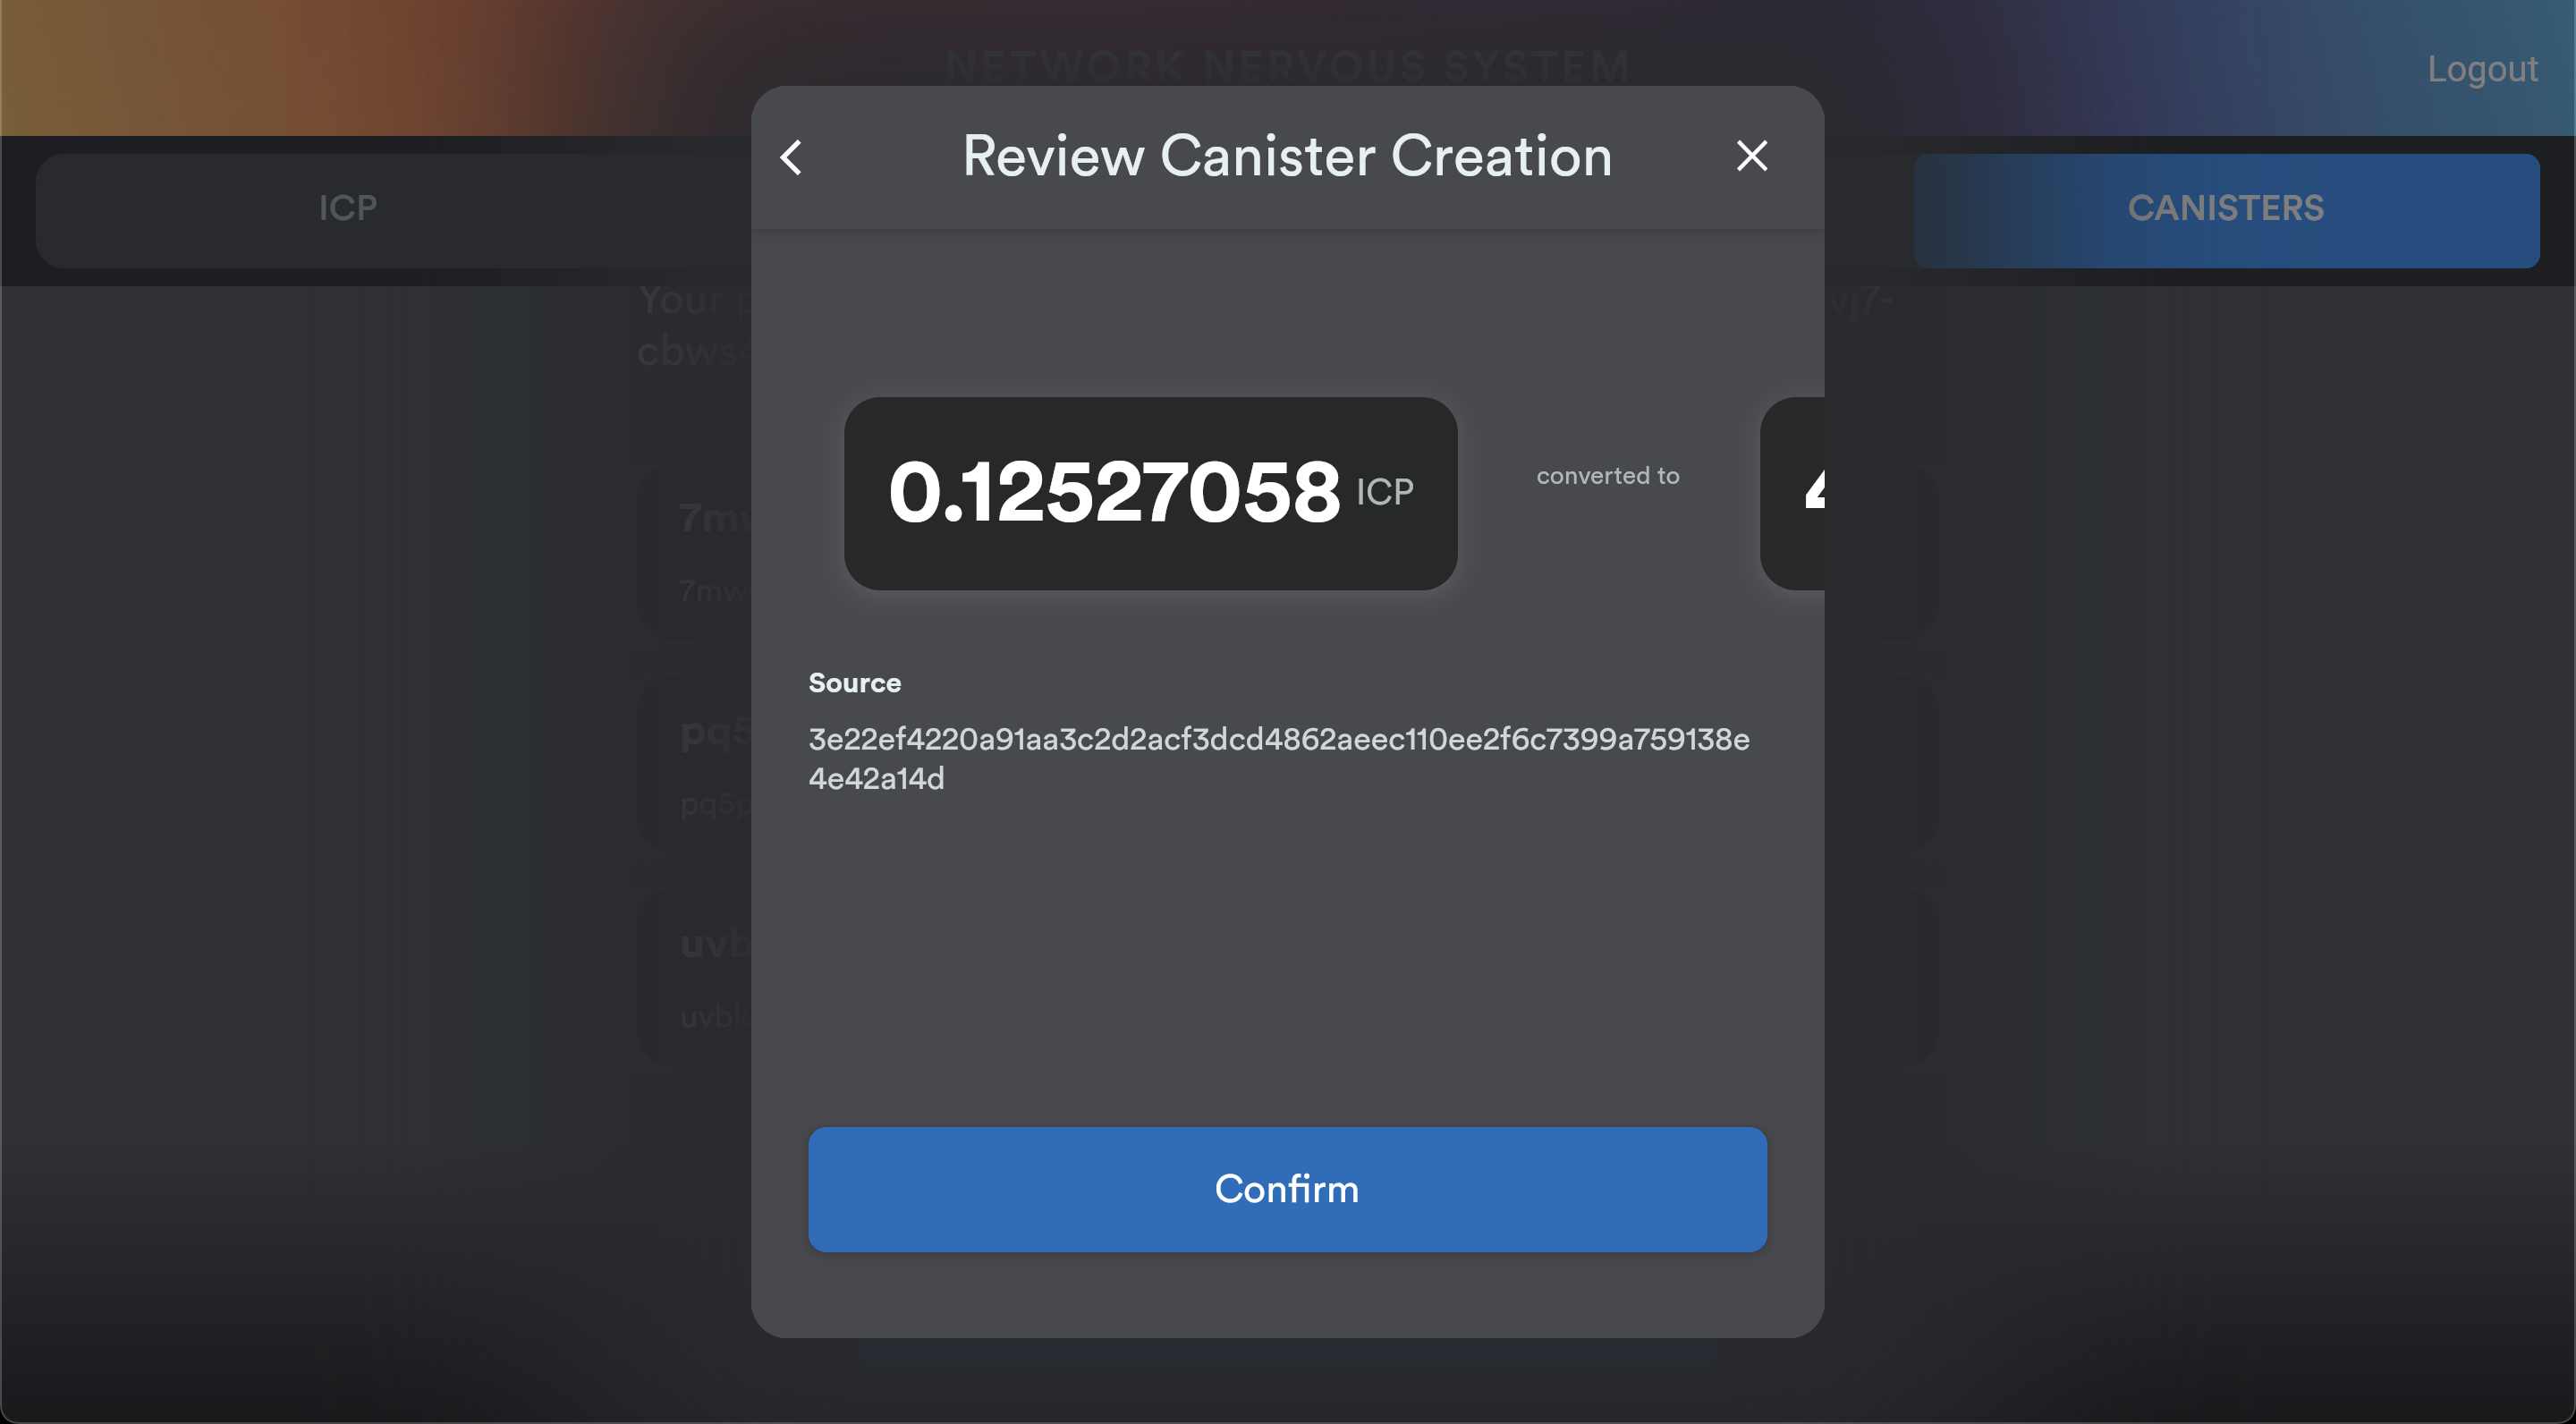 Review Canister creation